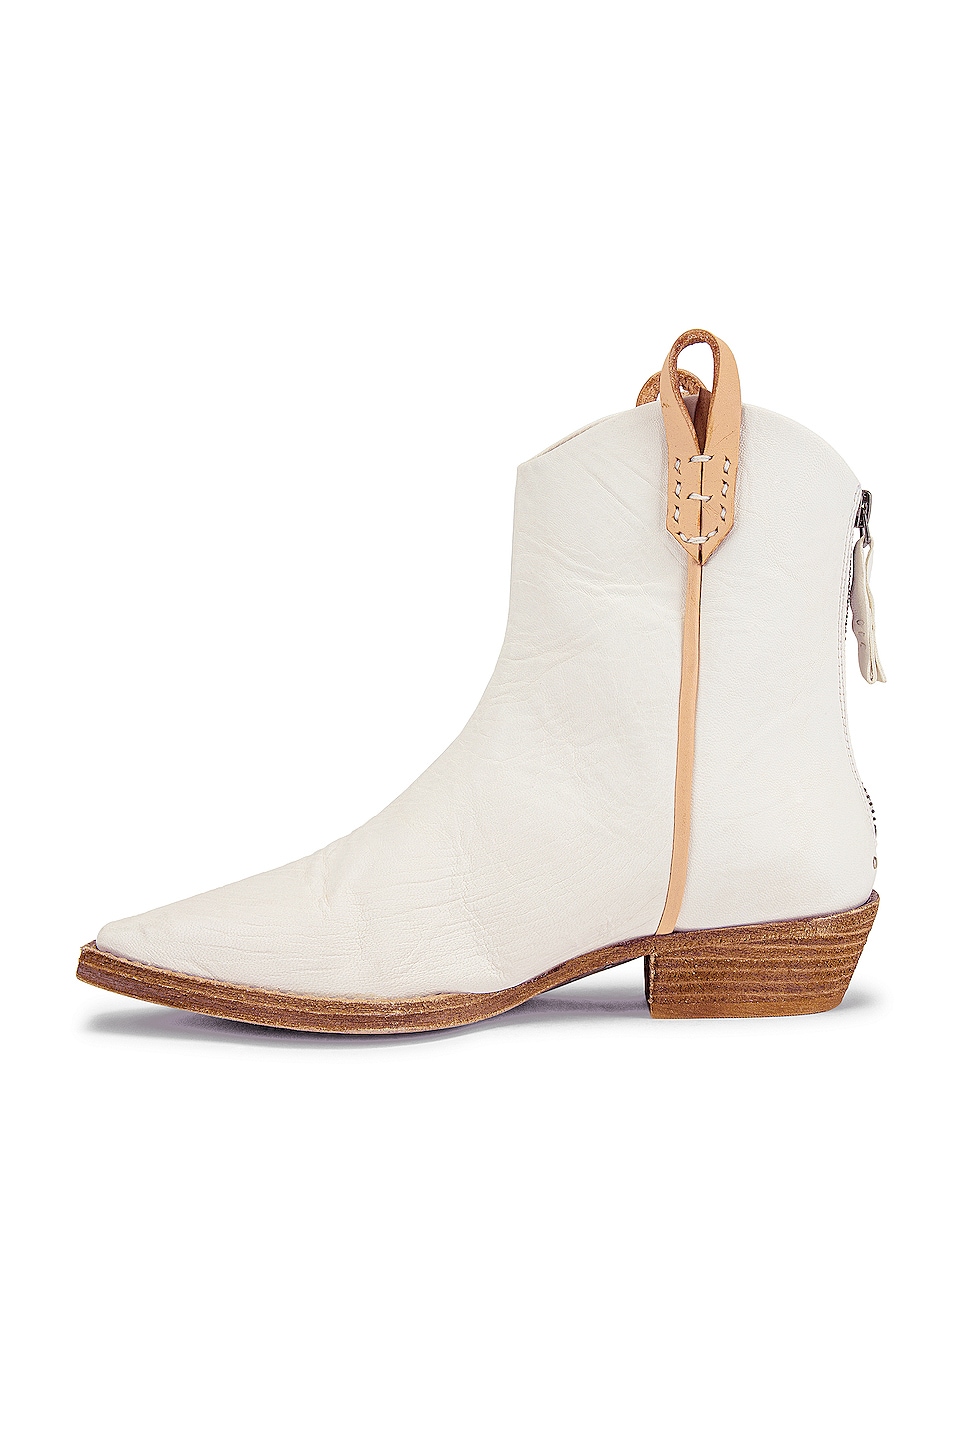 Free People X We The Free Wesley Ankle Boot in Bone | REVOLVE